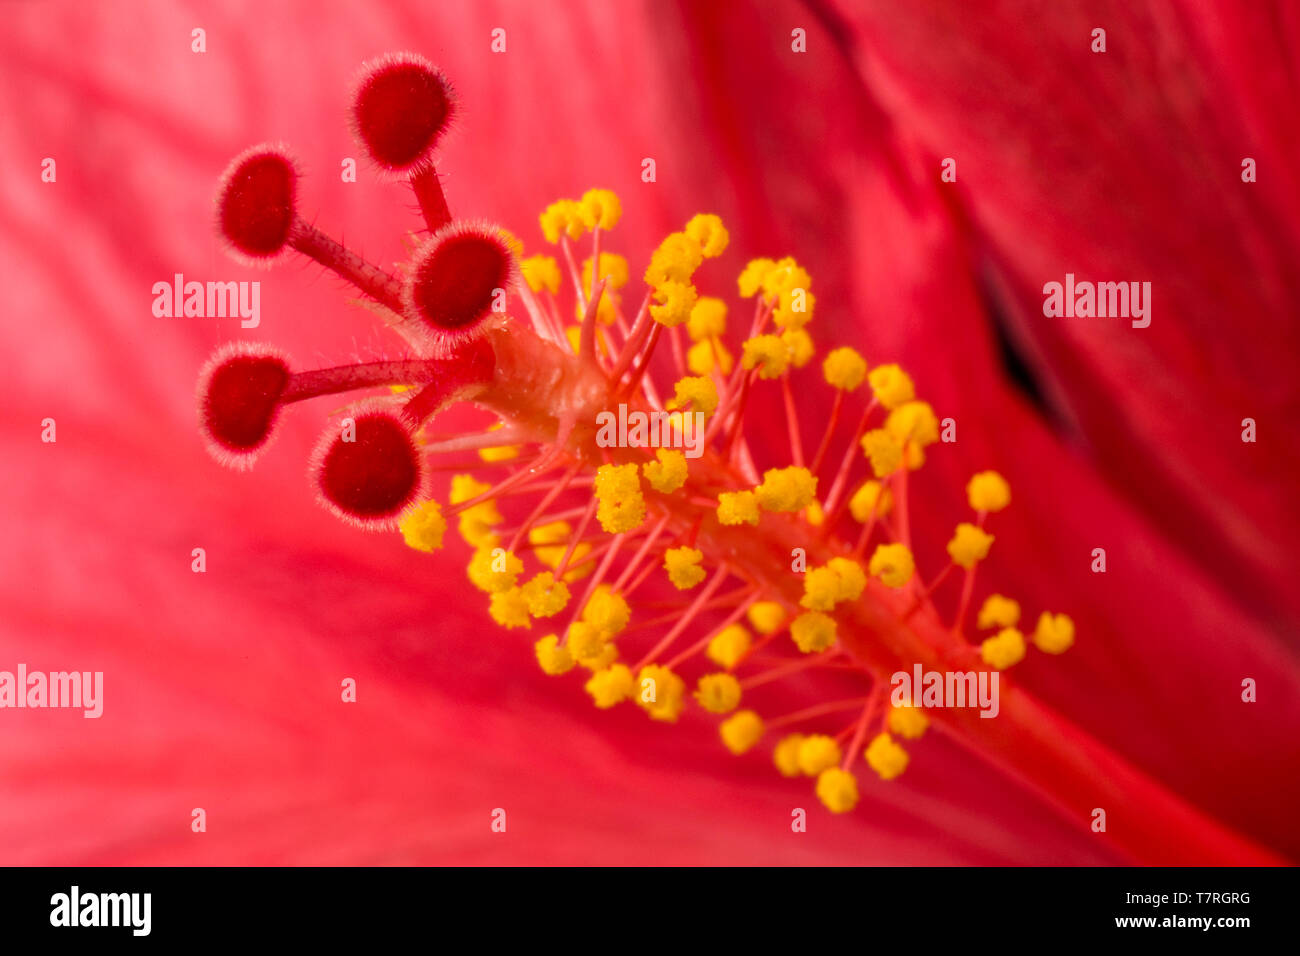 Stigma, style, anthers and stamens from the flower of an Hibiscus rosa-sinensis plant Stock Photo